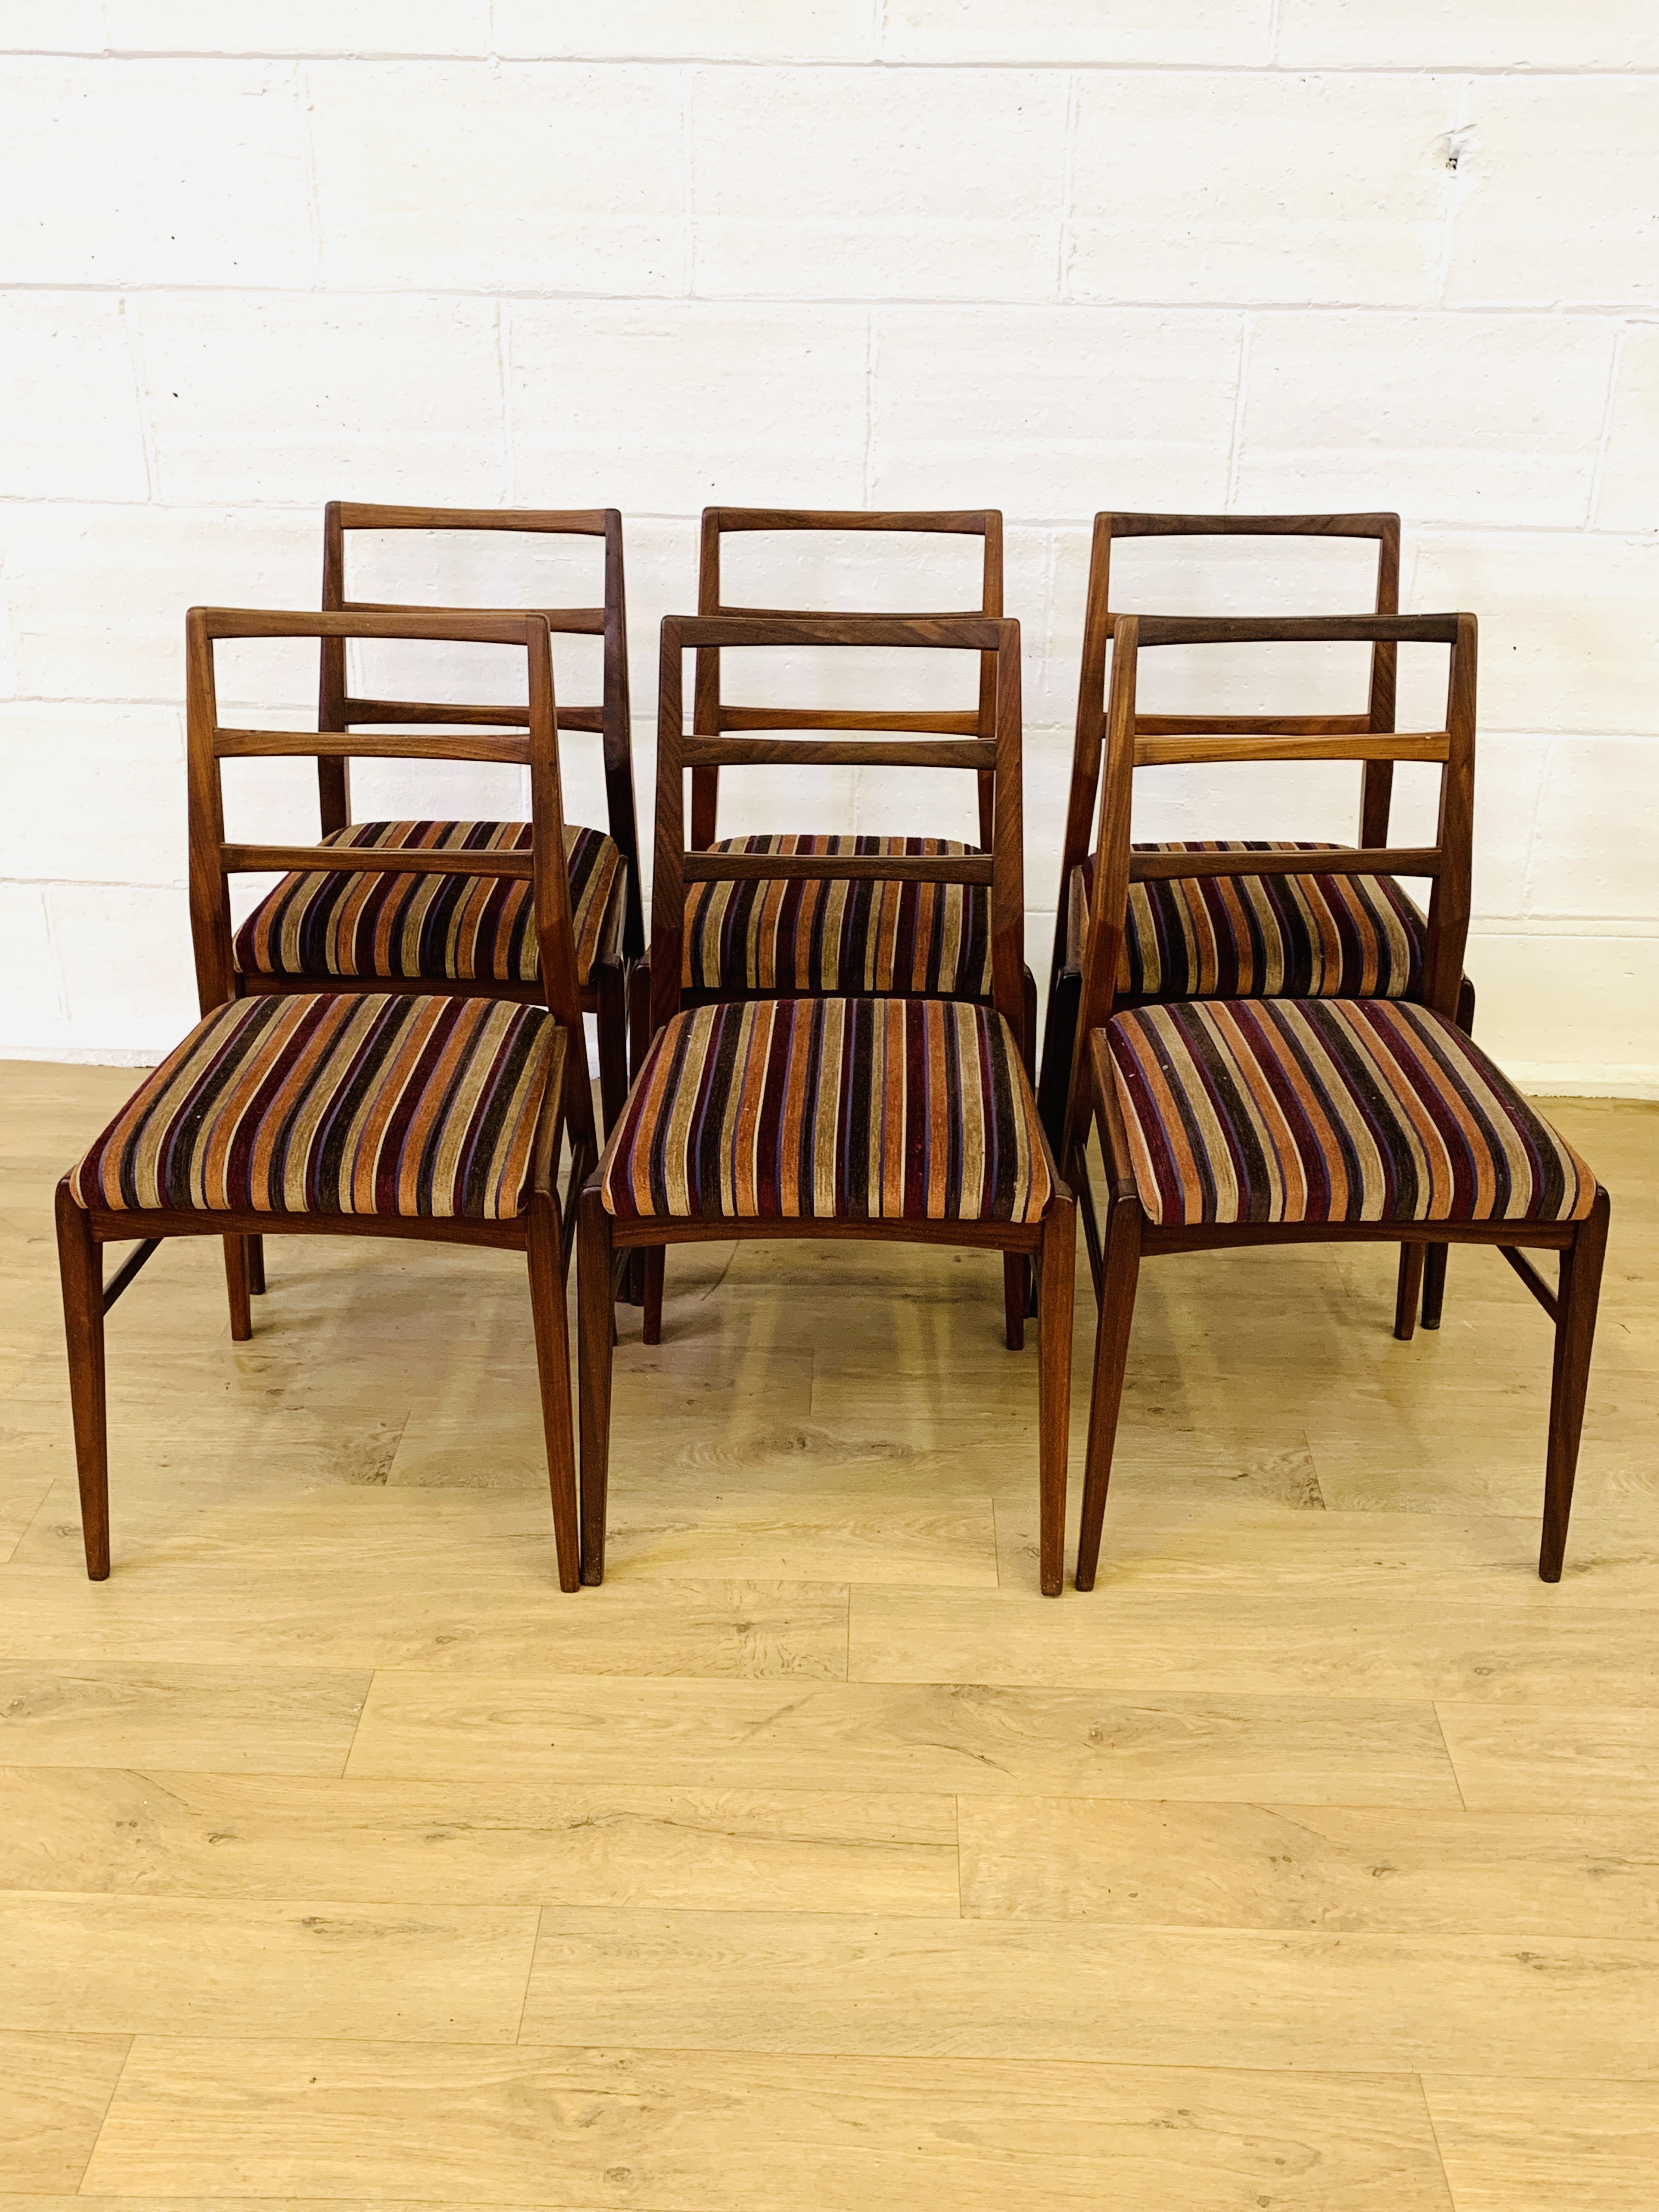 Six teak dining chairs - Image 2 of 5